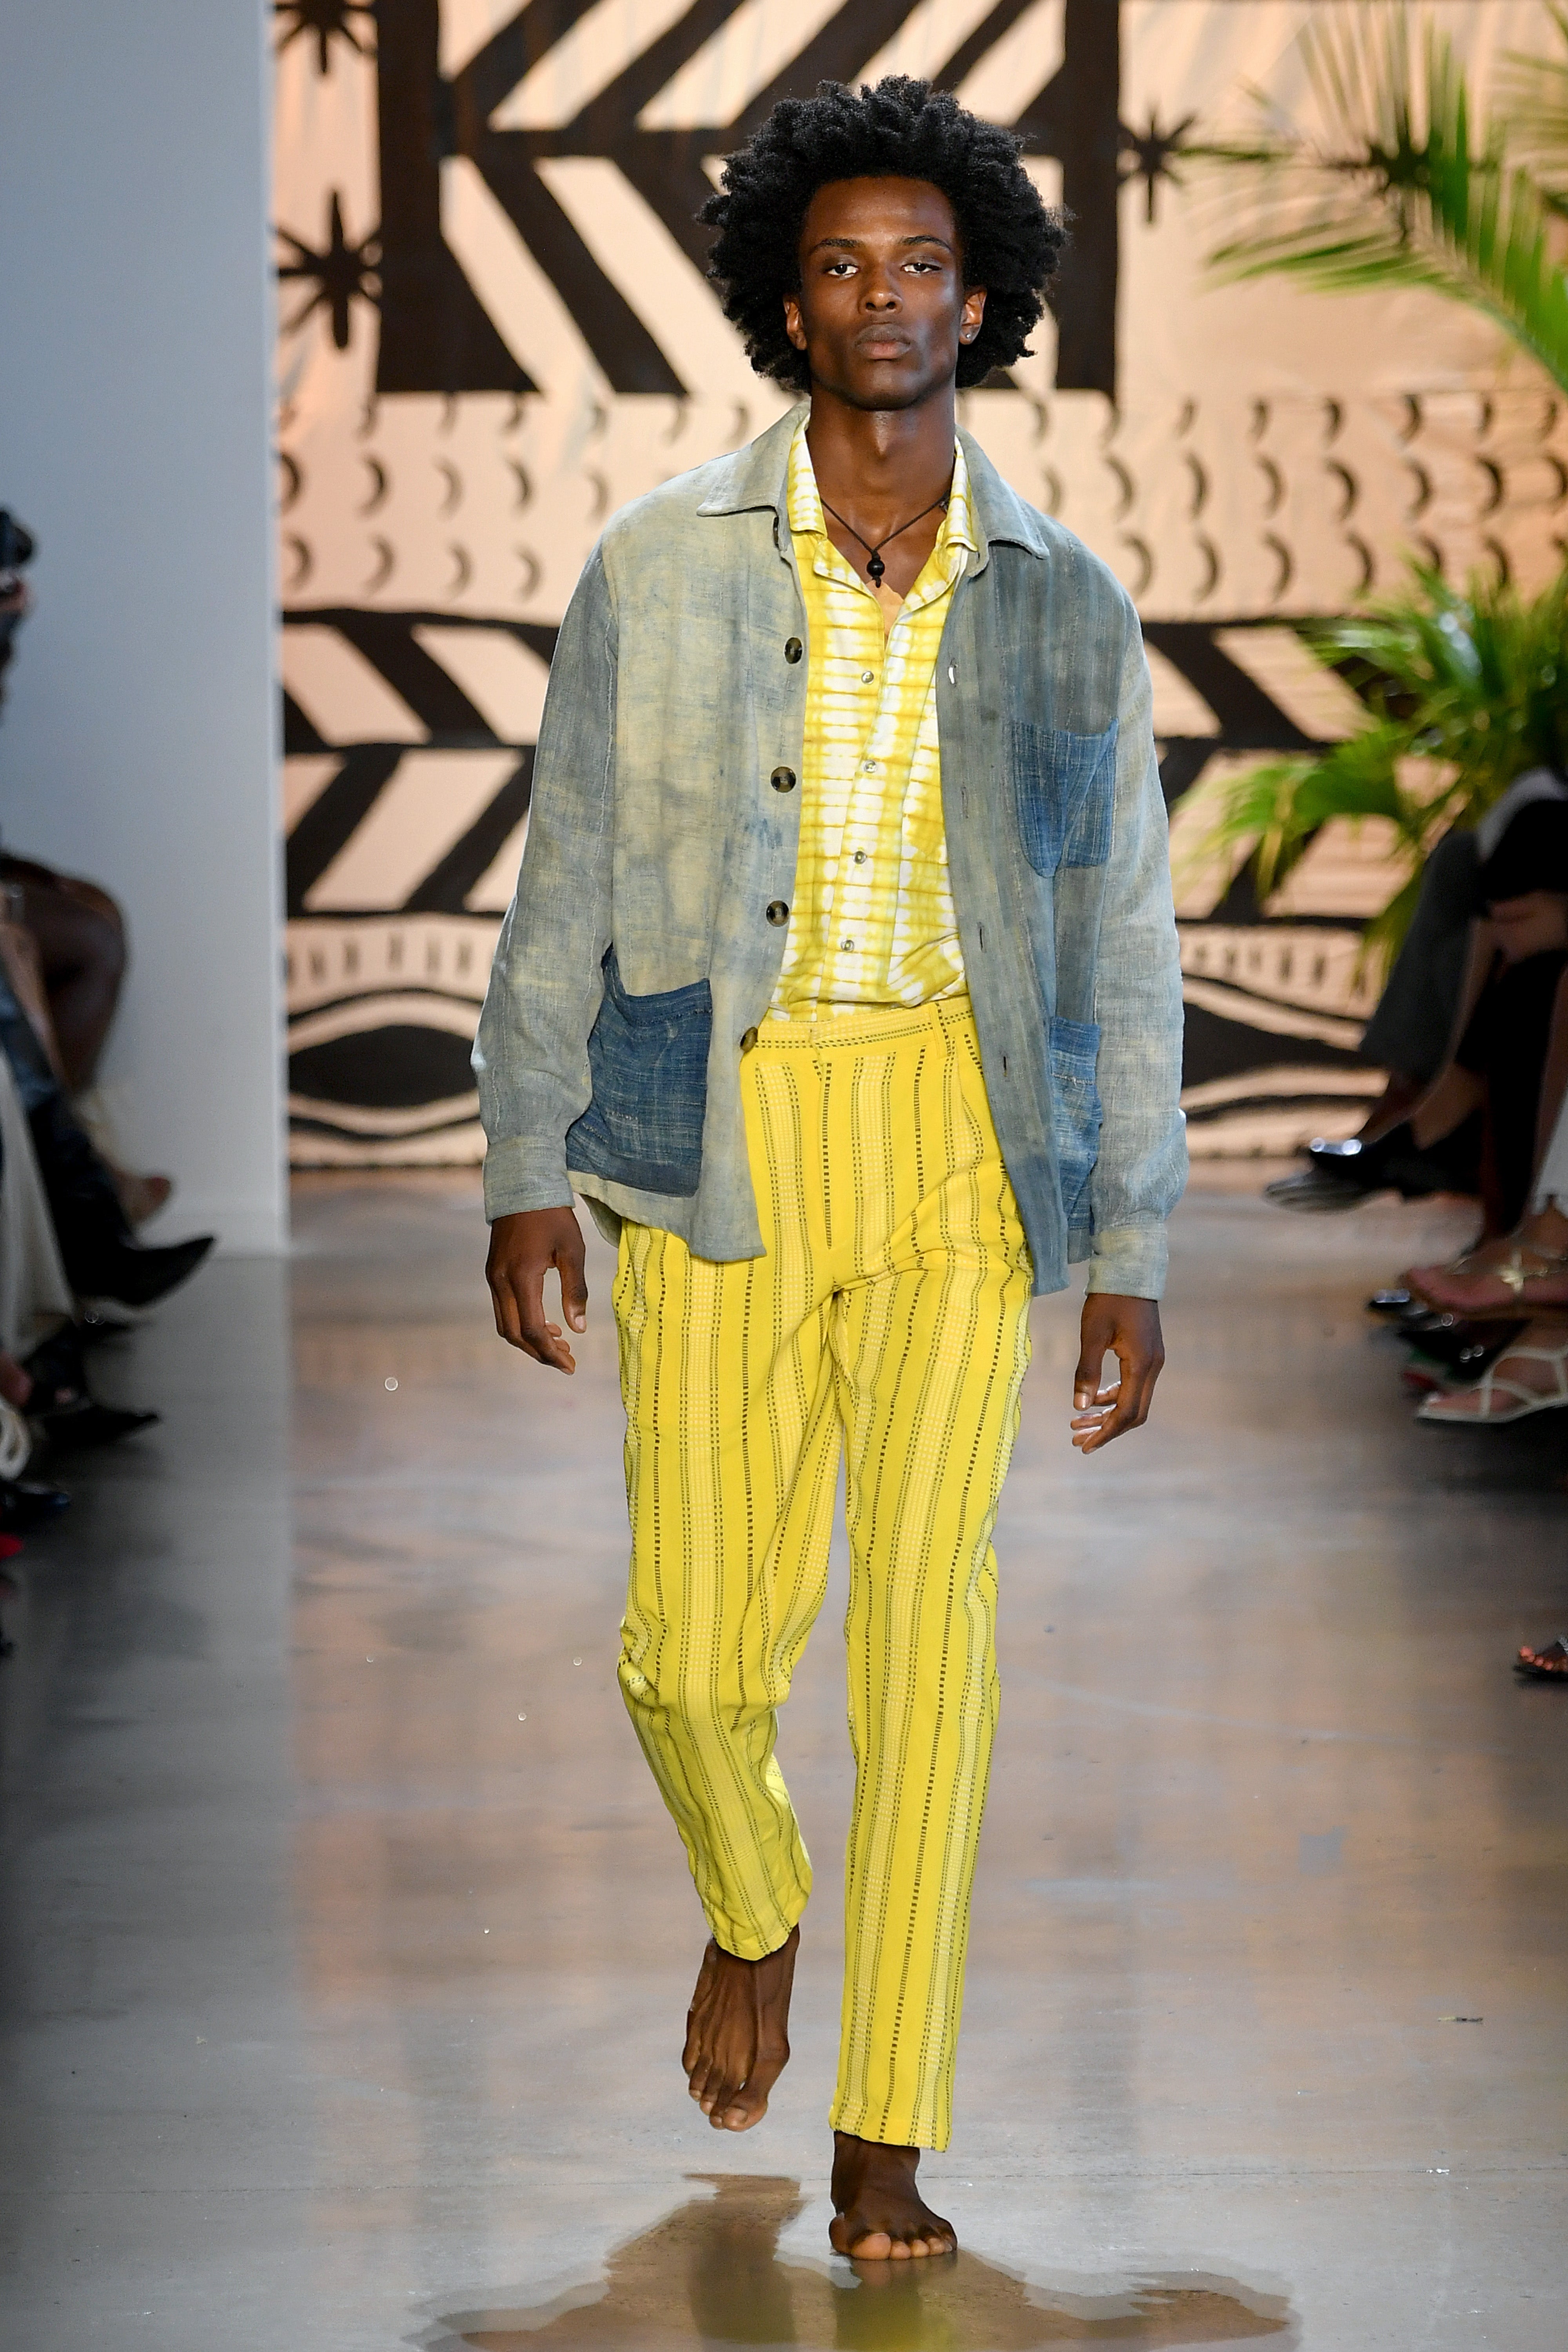 NYFW: Studio One Eighty-Nine’s Spring/Summer 2020 Collection Was An Ode To Africa